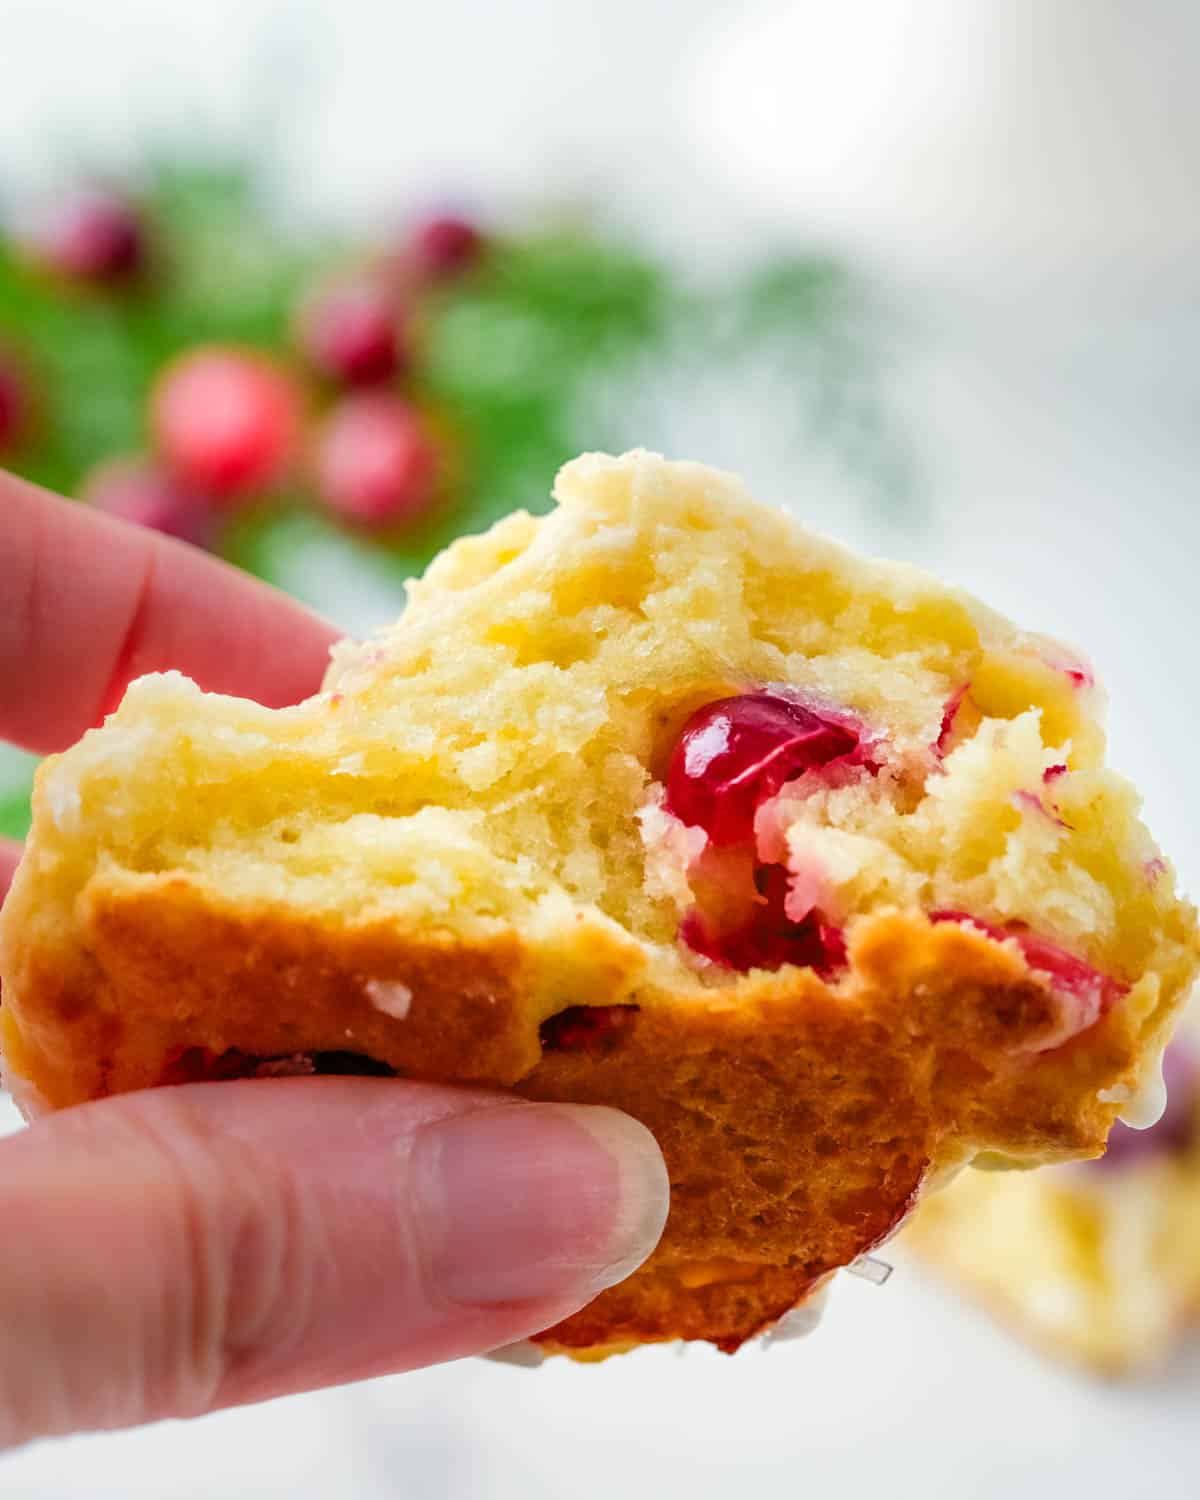 Breaking open the orange scone to show the cranberries and the buttery, flaky interior.